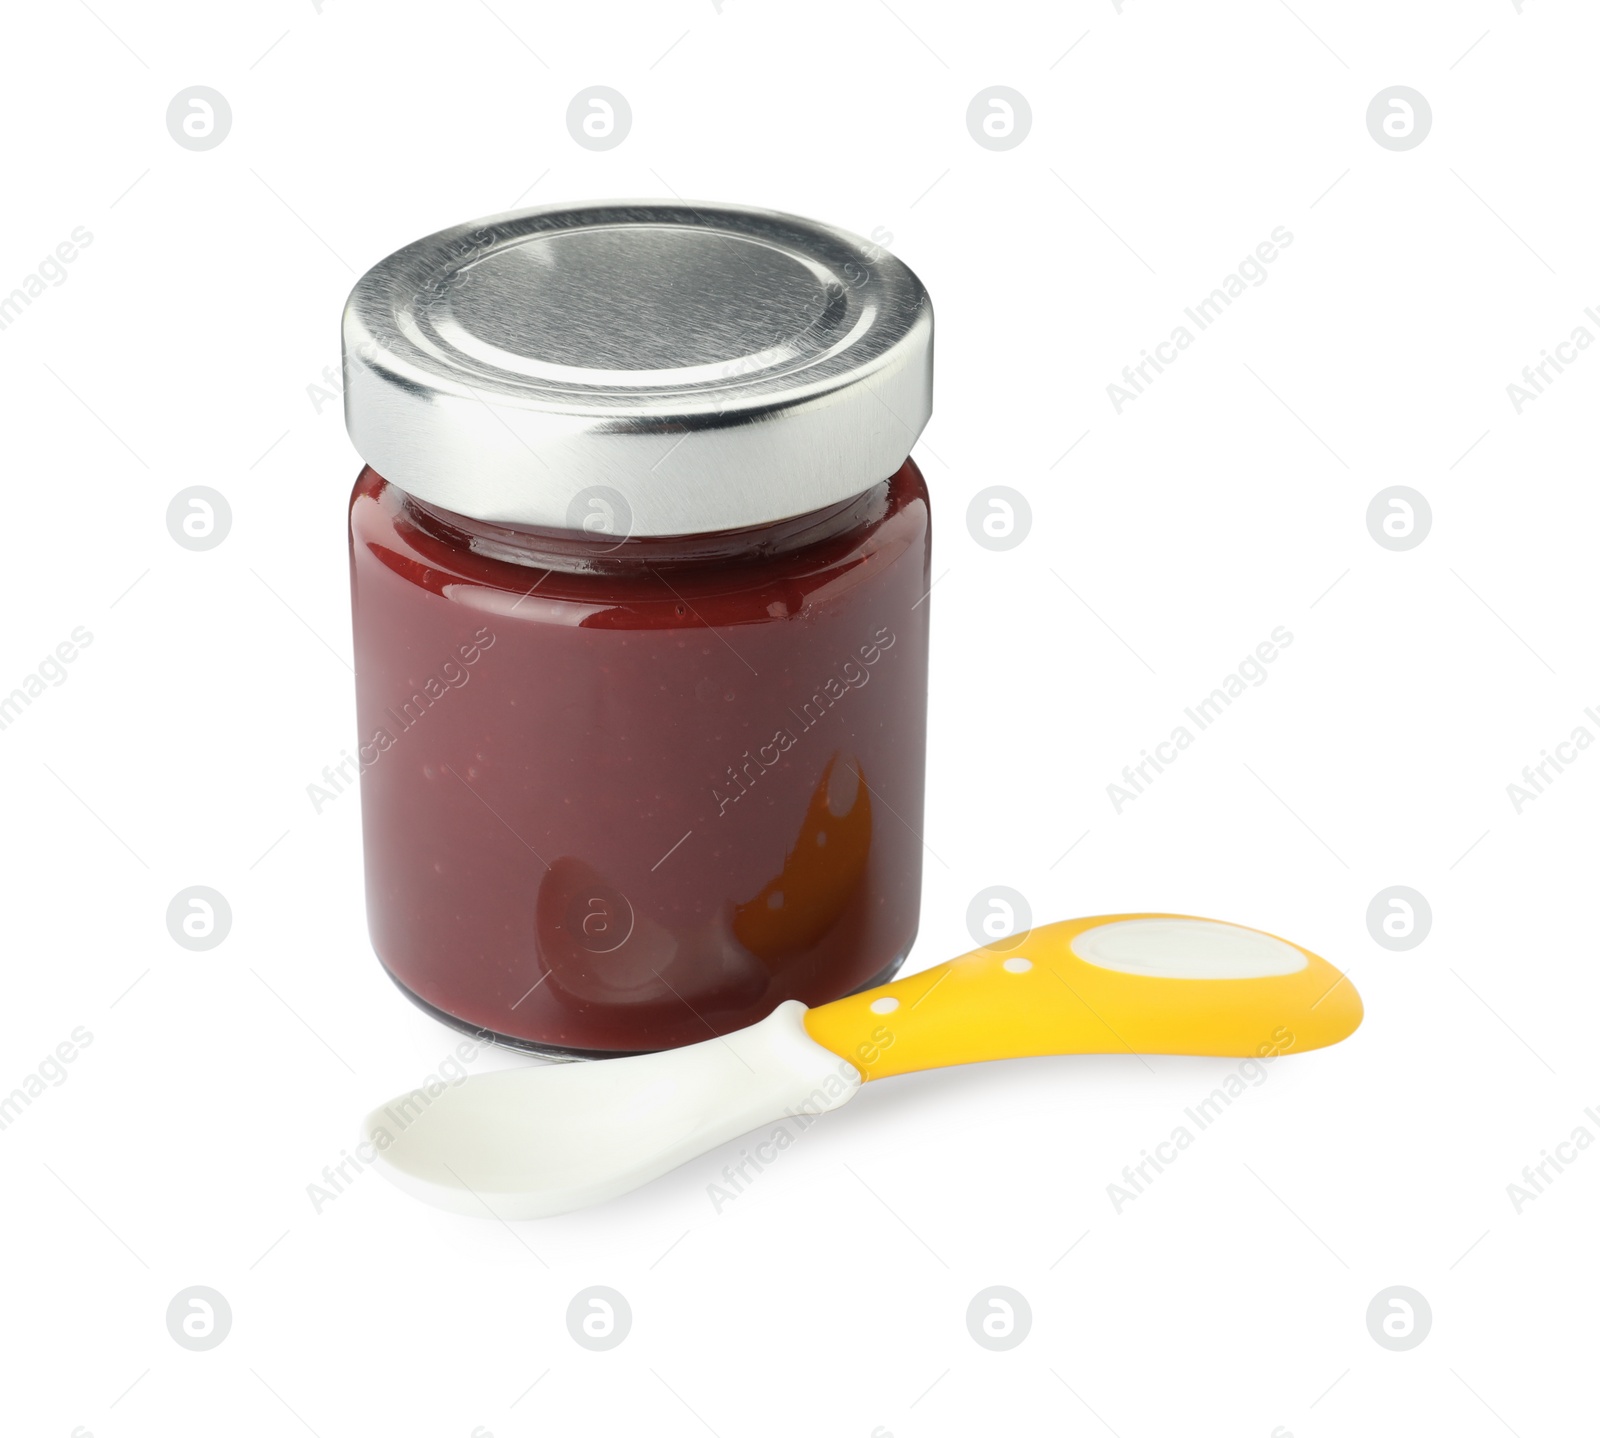 Photo of Jar of healthy baby food and spoon on white background